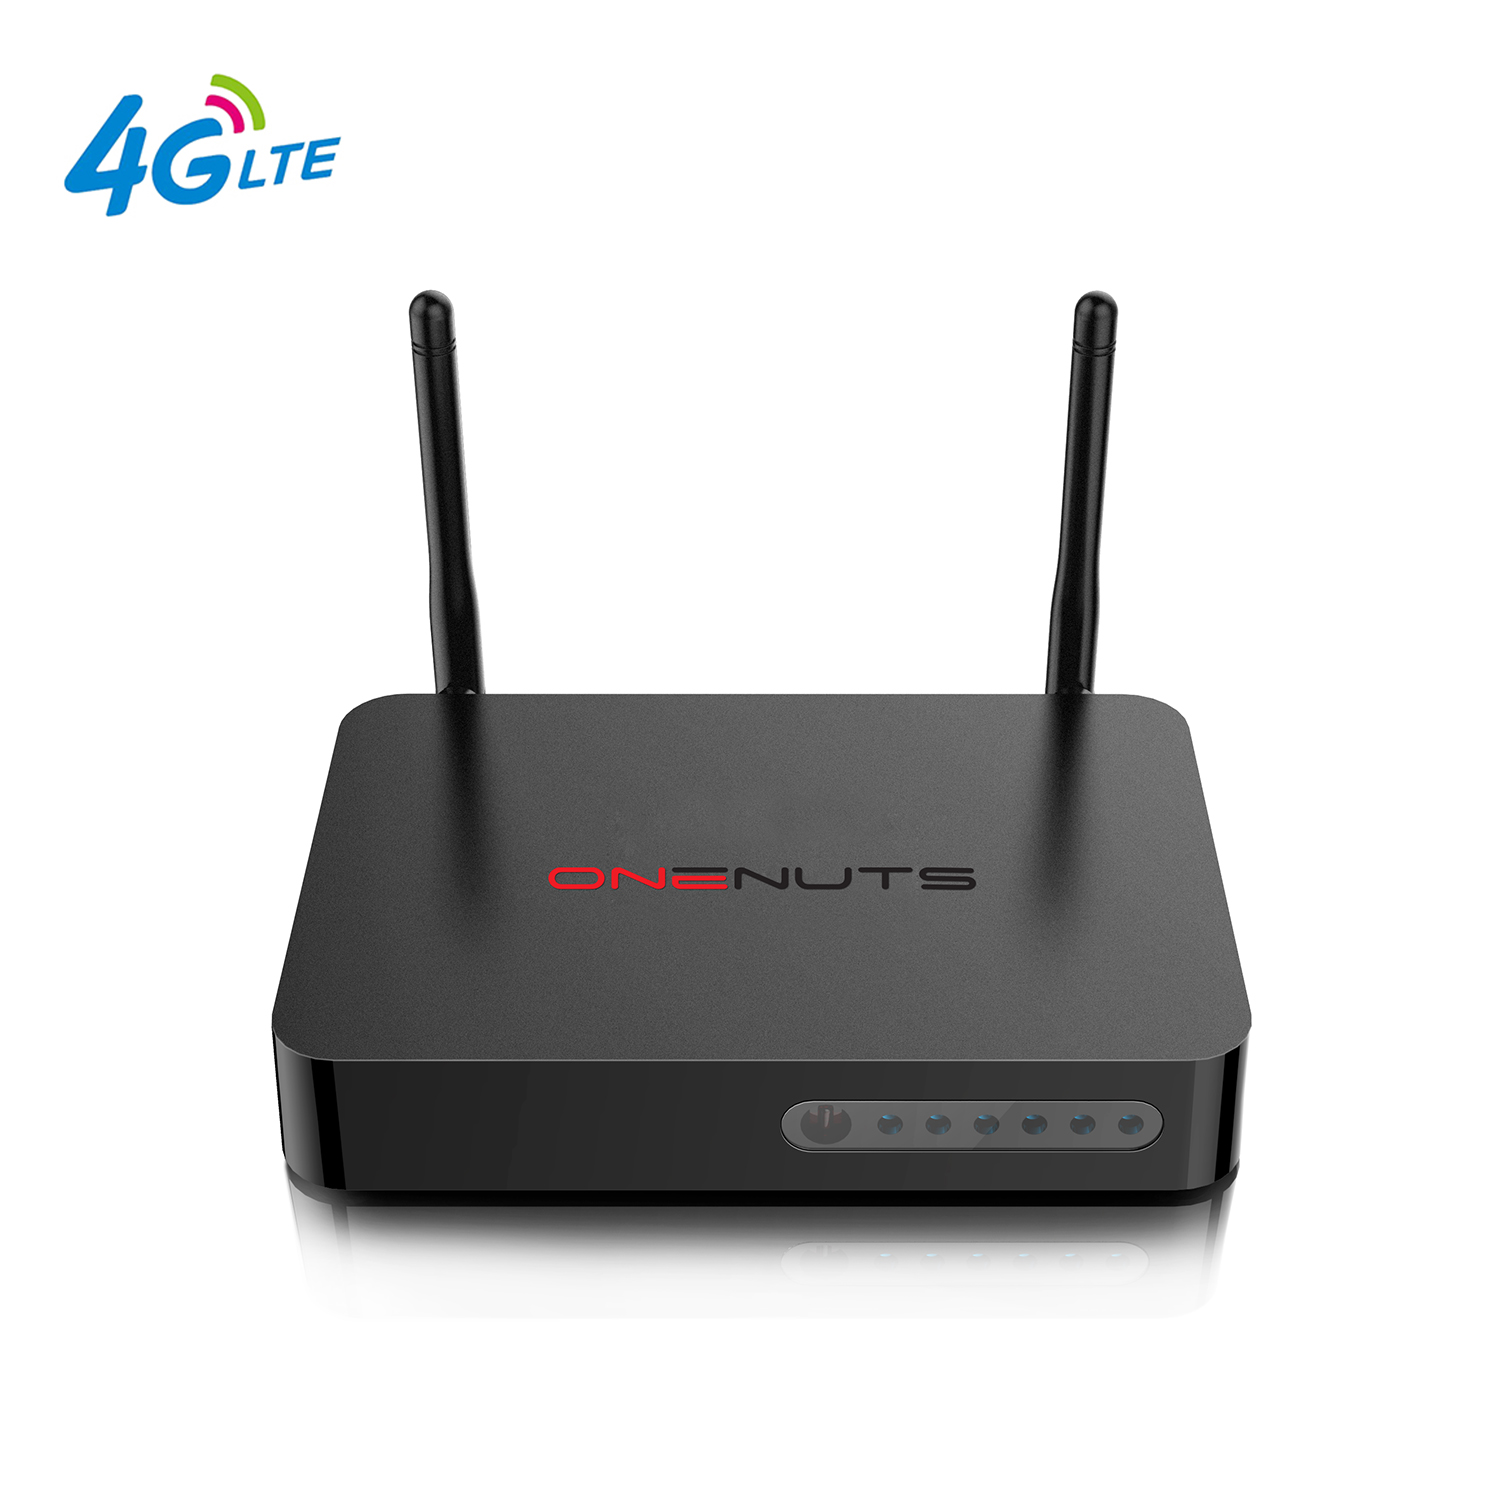 Smart Android TV Box, Android TV Box Huawei WCDMA Modem intégré